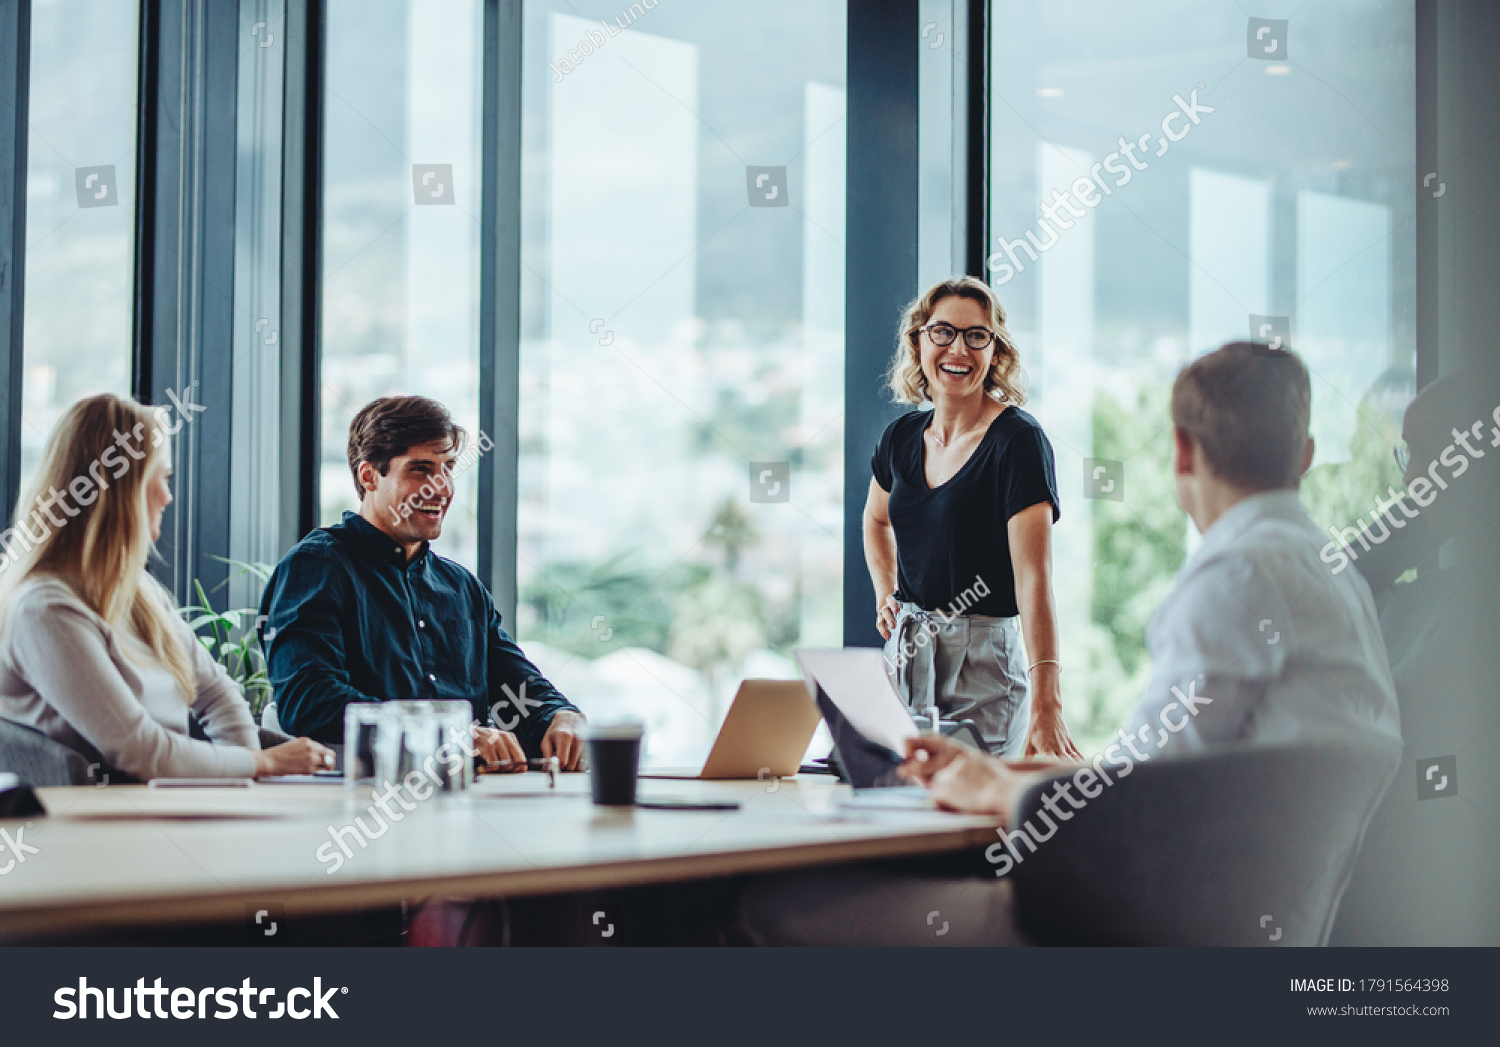 Office colleagues having casual discussion during meeting in conference room. Group of men and women sitting in conference room and smiling. #1791564398